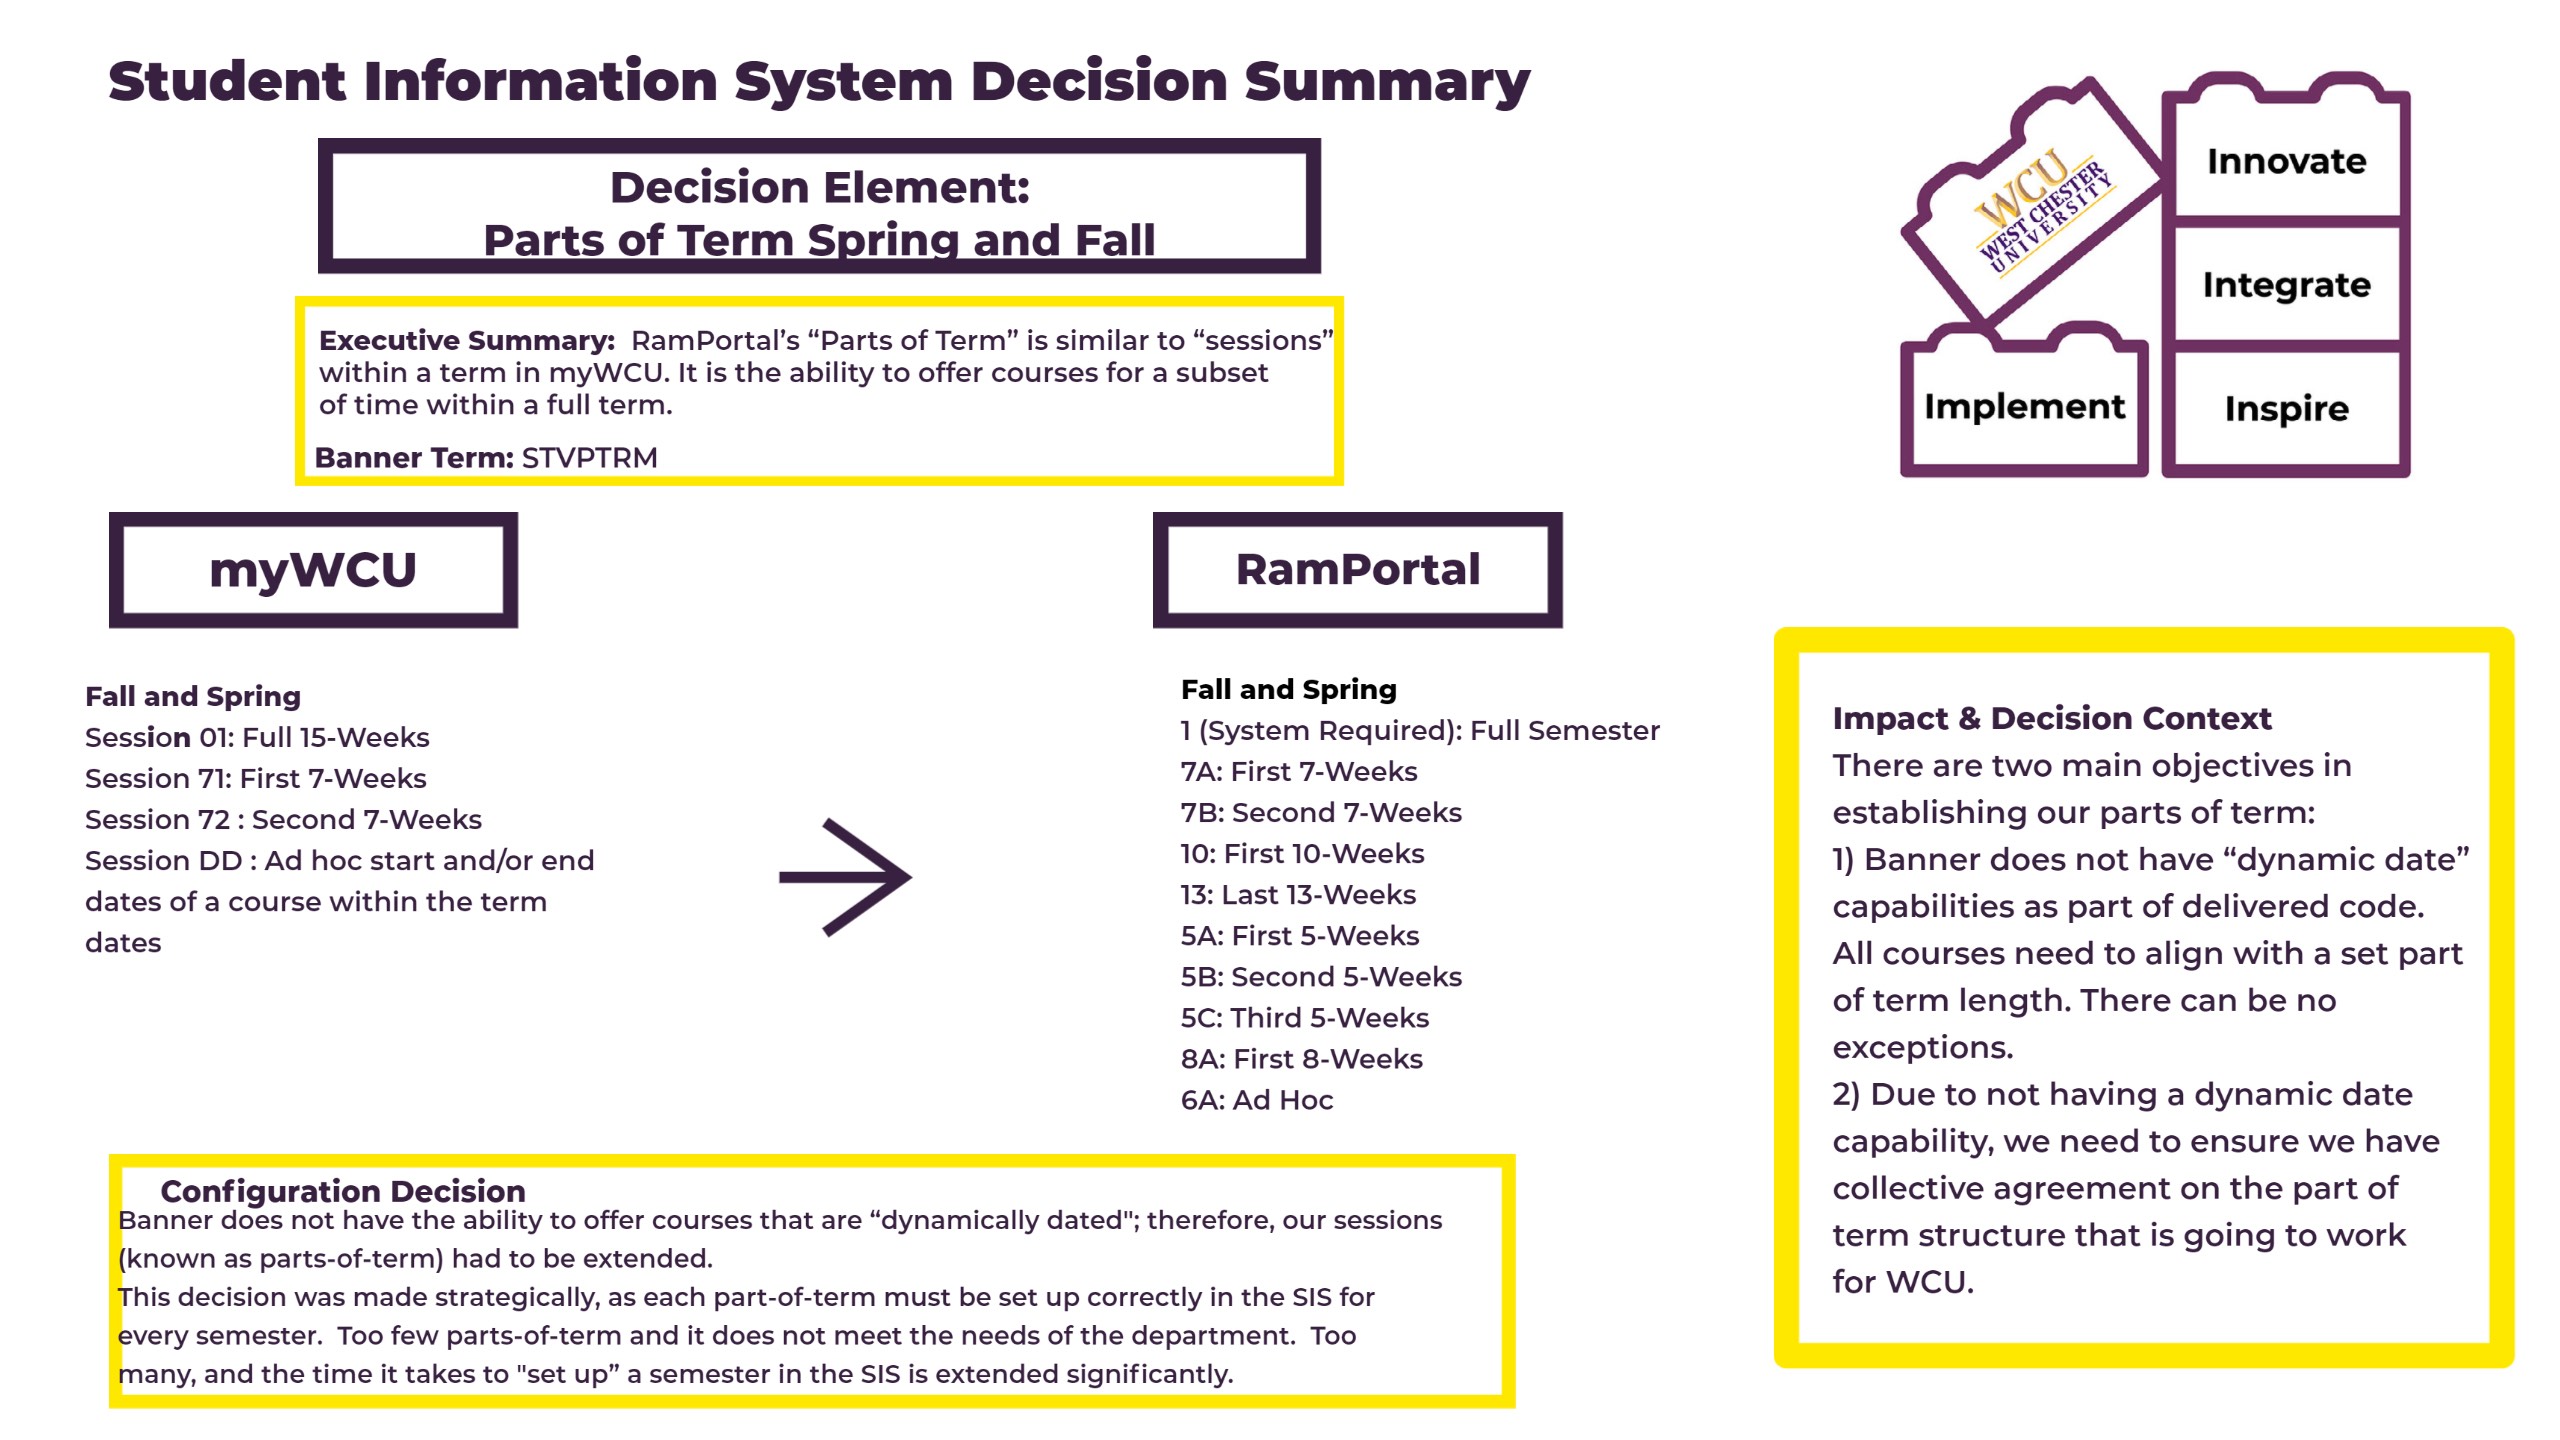   Student Information System Decision Summary Decision Element: Parts of Term Spring and Fall Executive Summary: RamPortal's "Parts of Term" is similar to "sessions" within a term in myWCU. It is the ability to offer courses for a subset of time within a full term. Banner Term: STVPTRM WCU WEST CHESTER UNIVERSITY Innovate Implement Integrate Inspire myWCU Fall and Spring Session 01: Full 15-Weeks Session 71: First 7-Weeks Session 72: Second 7-Weeks Session DD: Ad hoc start and/or end dates of a course within the term dates Configuration Decision RamPortal Fall and Spring 1 (System Required): Full Semester 7A: First 7-Weeks 7B: Second 7-Weeks 10: First 10-Weeks 13: Last 13-Weeks 5A: First 5-Weeks 5B: Second 5-Weeks 5C: Third 5-Weeks 8A: First 8-Weeks 6A: Ad Hoc Banner does not have the ability to offer courses that are "dynamically dated"; therefore, our sessions (known as parts-of-term) had to be extended. This decision was made strategically, as each part-of-term must be set up correctly in the SIS for every semester. Too few parts-of-term and it does not meet the needs of the department. Too many, and the time it takes to "set up" a semester in the SIS is extended significantly. Impact & Decision Context There are two main objectives in establishing our parts of term: 1) Banner does not have "dynamic date" capabilities as part of delivered code. All courses need to align with a set part of term length. There can be no exceptions. 2) Due to not having a dynamic date capability, we need to ensure we have collective agreement on the part of term structure that is going to work for WCU.